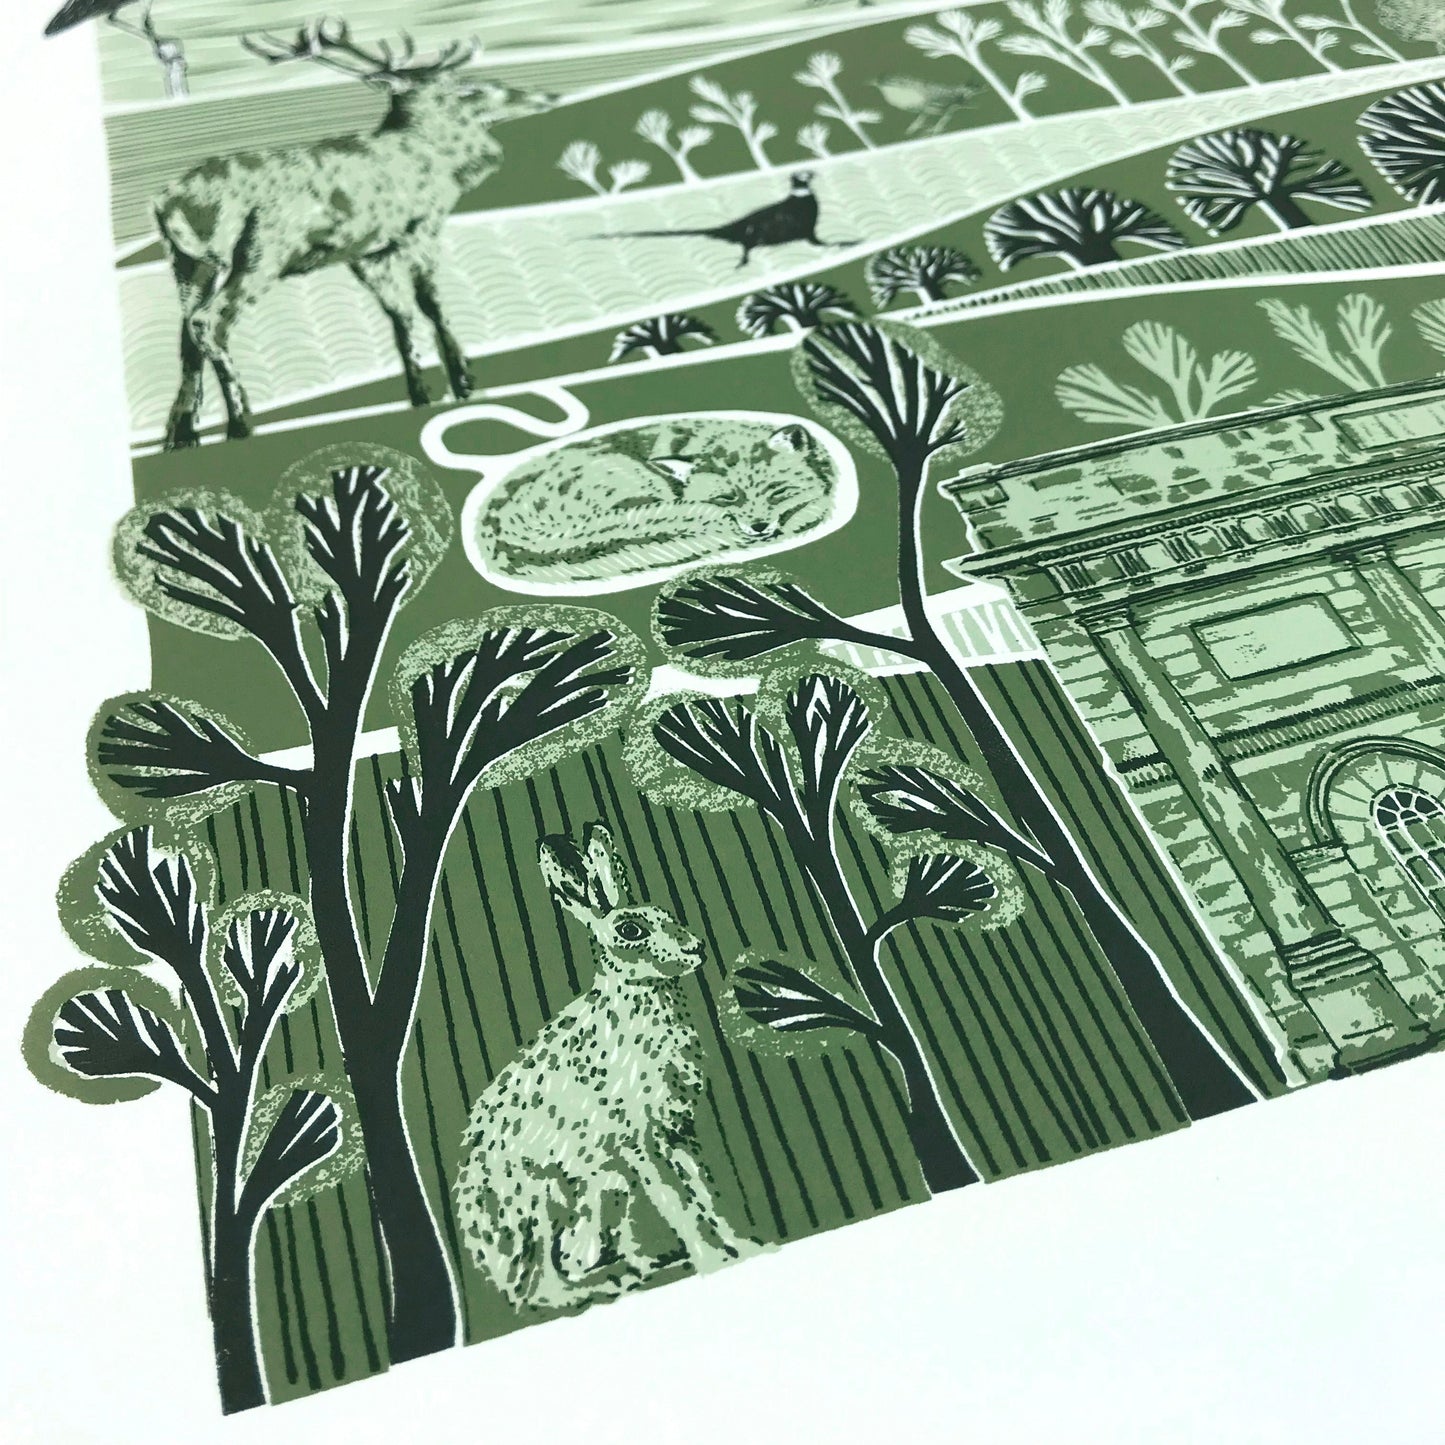 Folded Forest Harewood House Limited Edition Screen Print